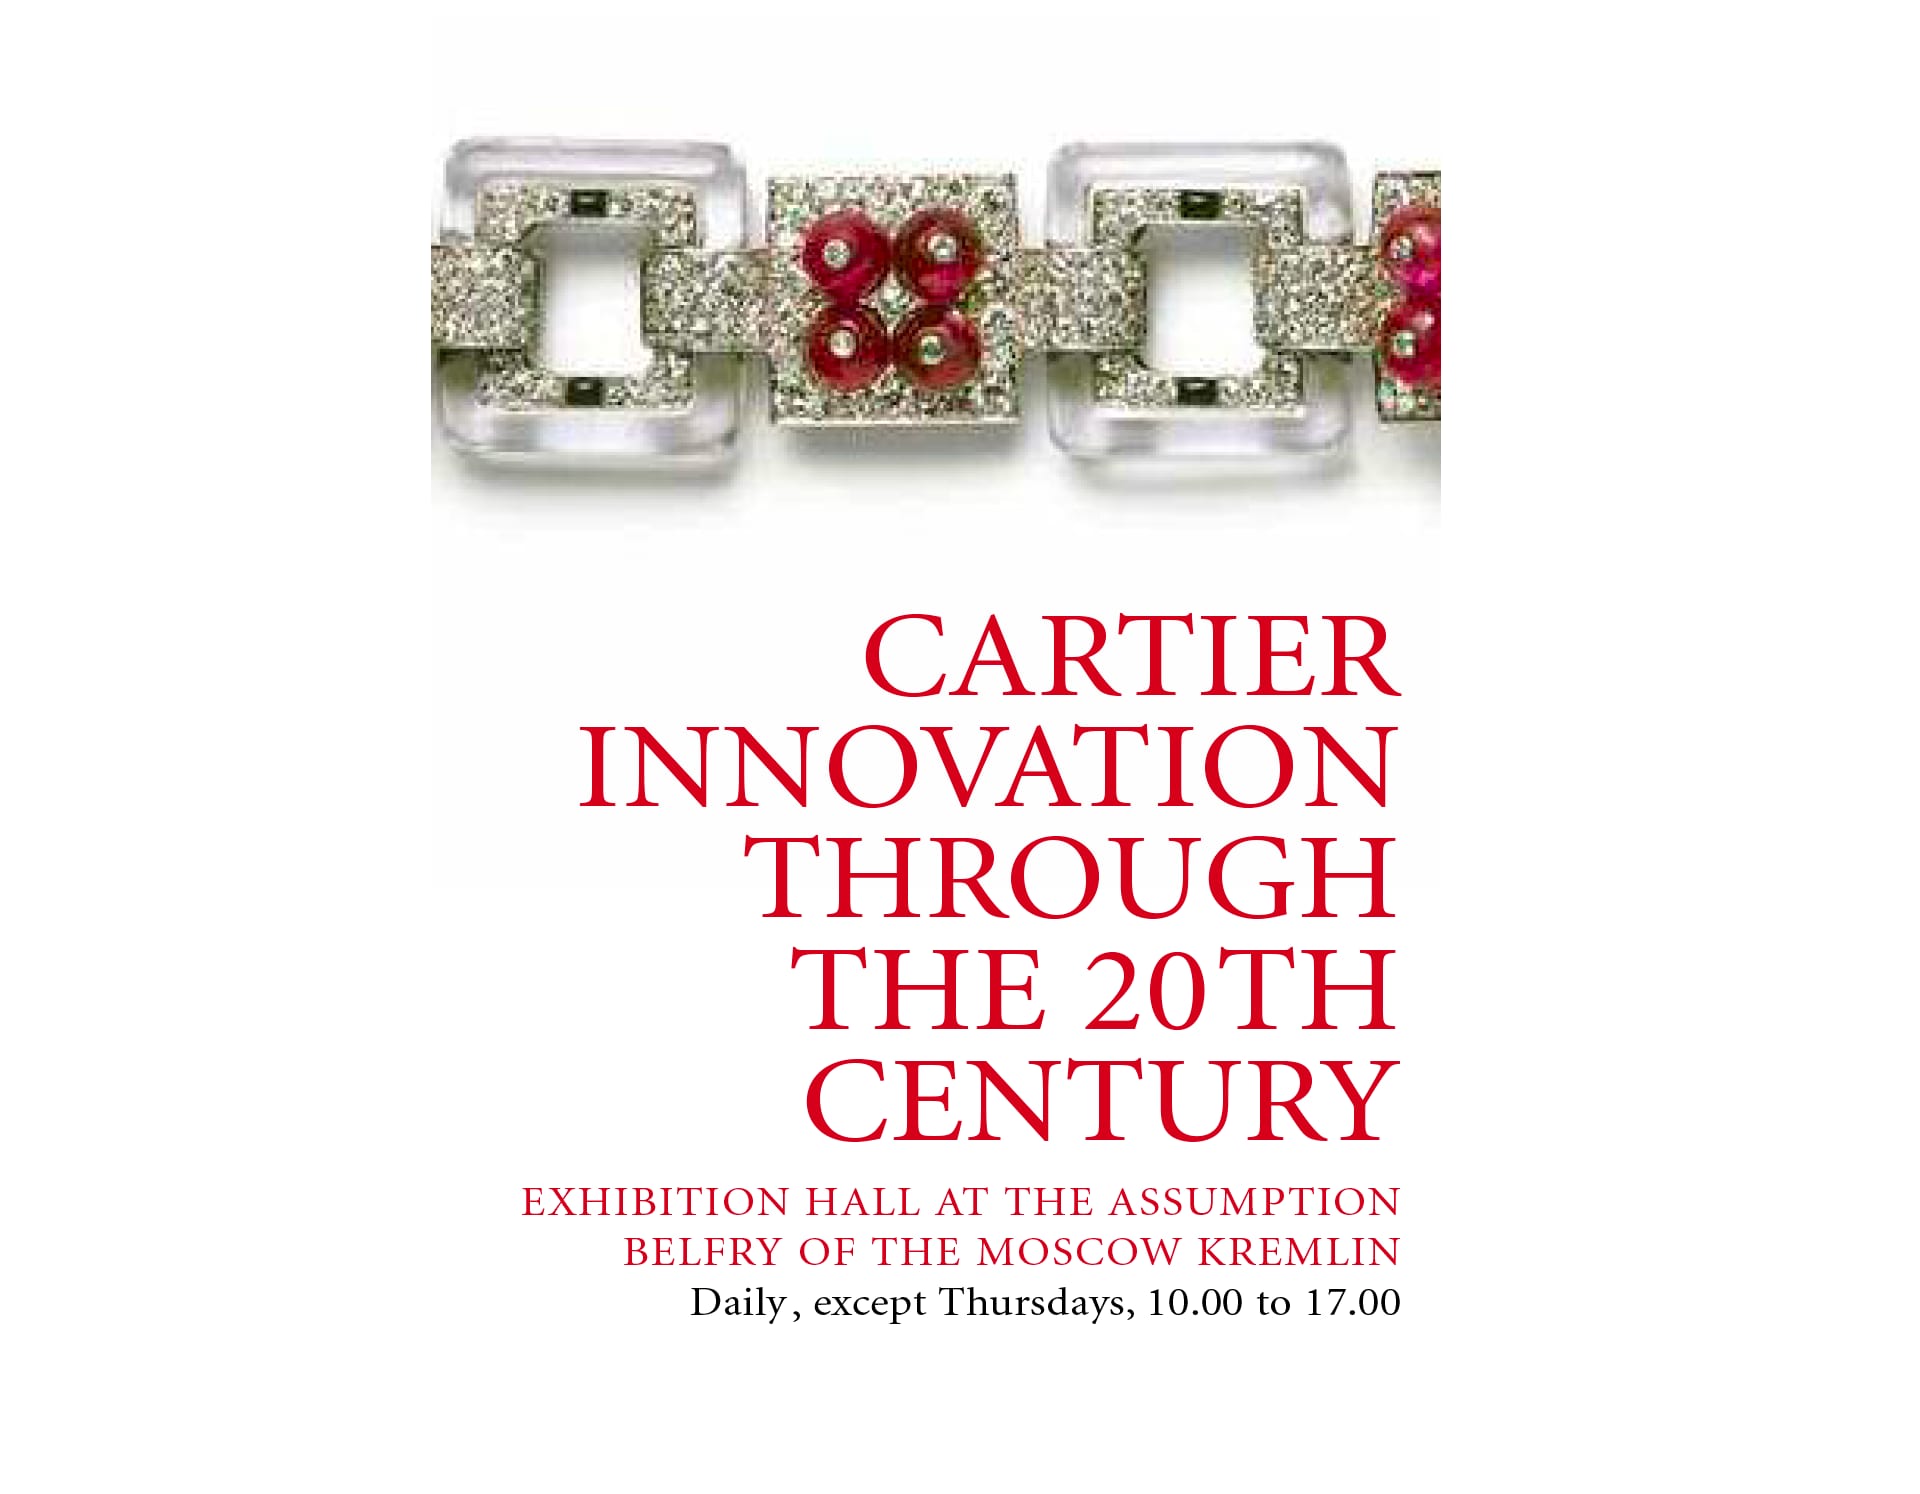 EP1 la maison the story living heritage cartier collection exhibitions innovation exhibitio